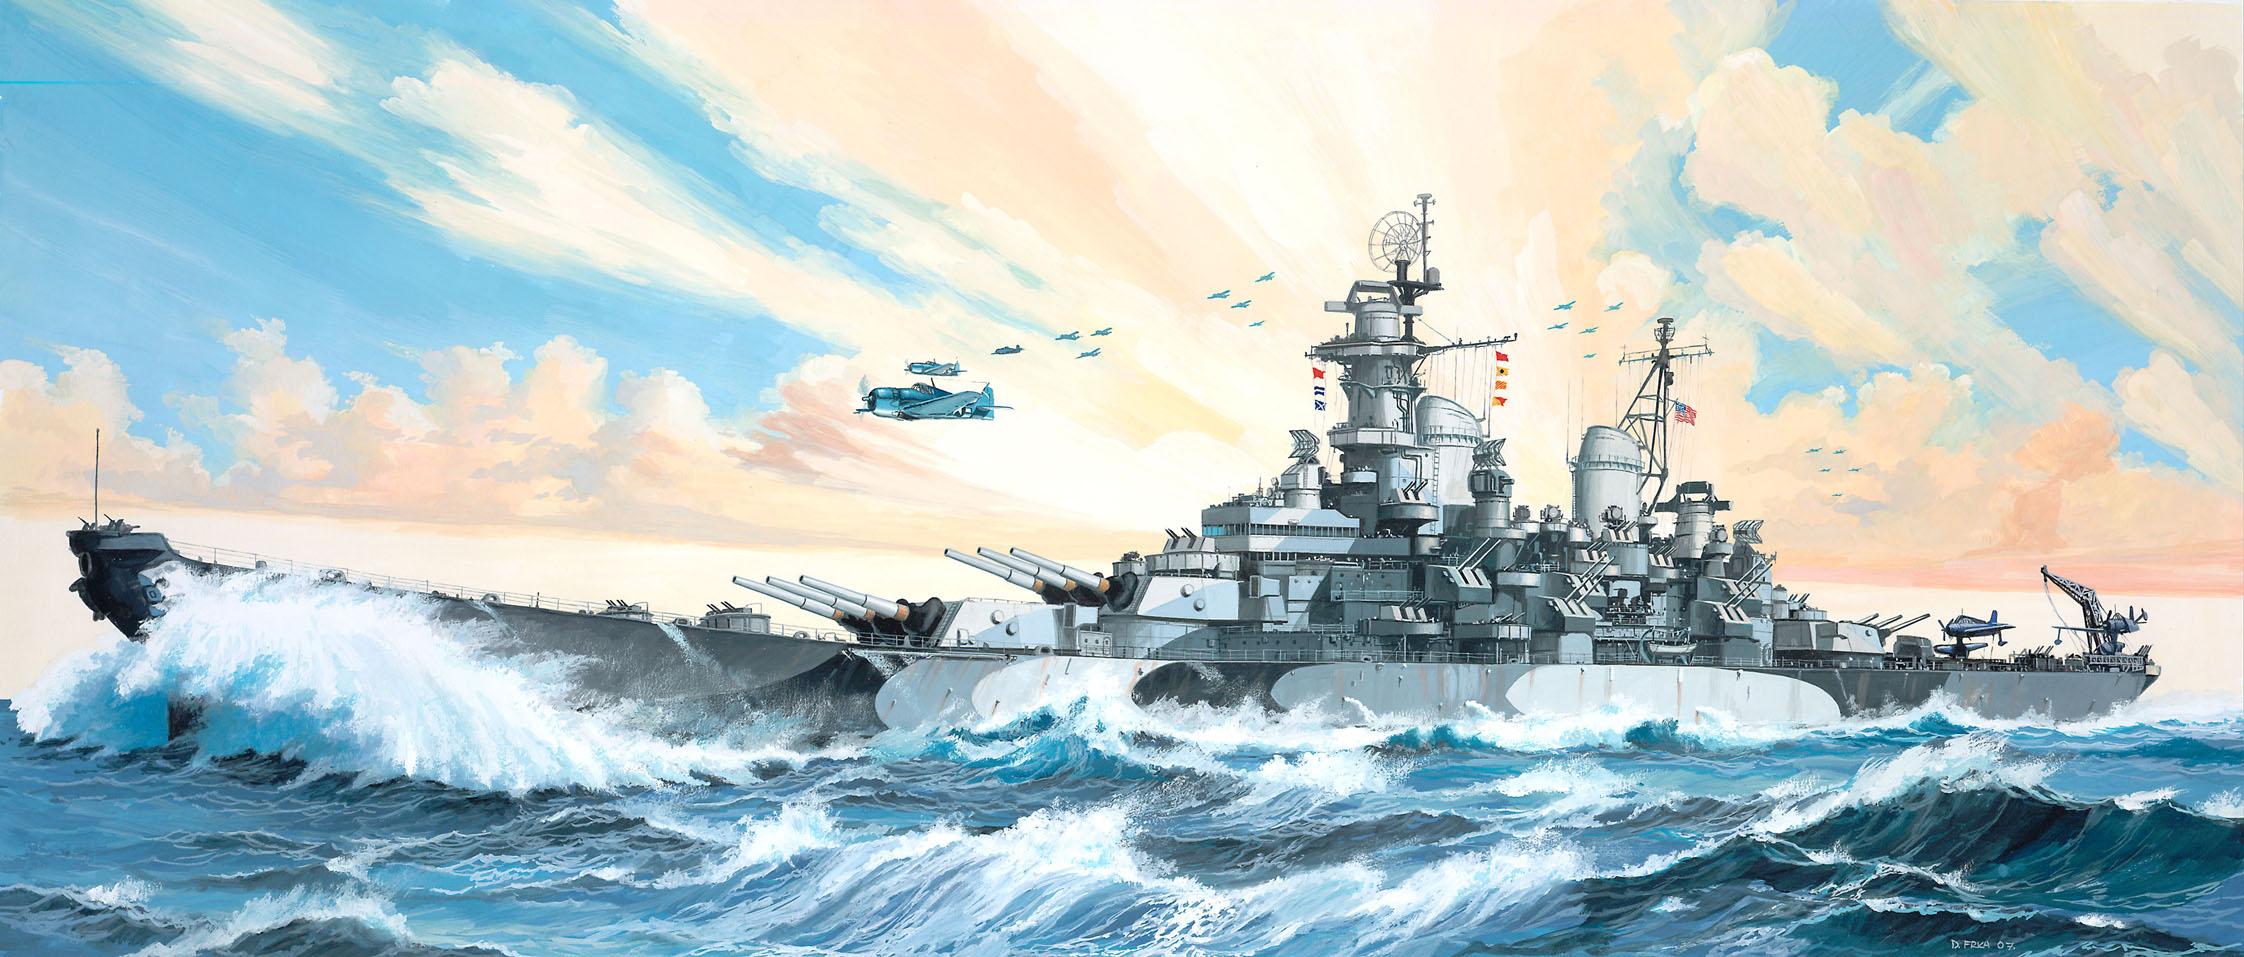 Warship Sea Aircraft Flying Sky Army Military Waves Water Clouds Artwork Flag Military Vehicle 2244x957